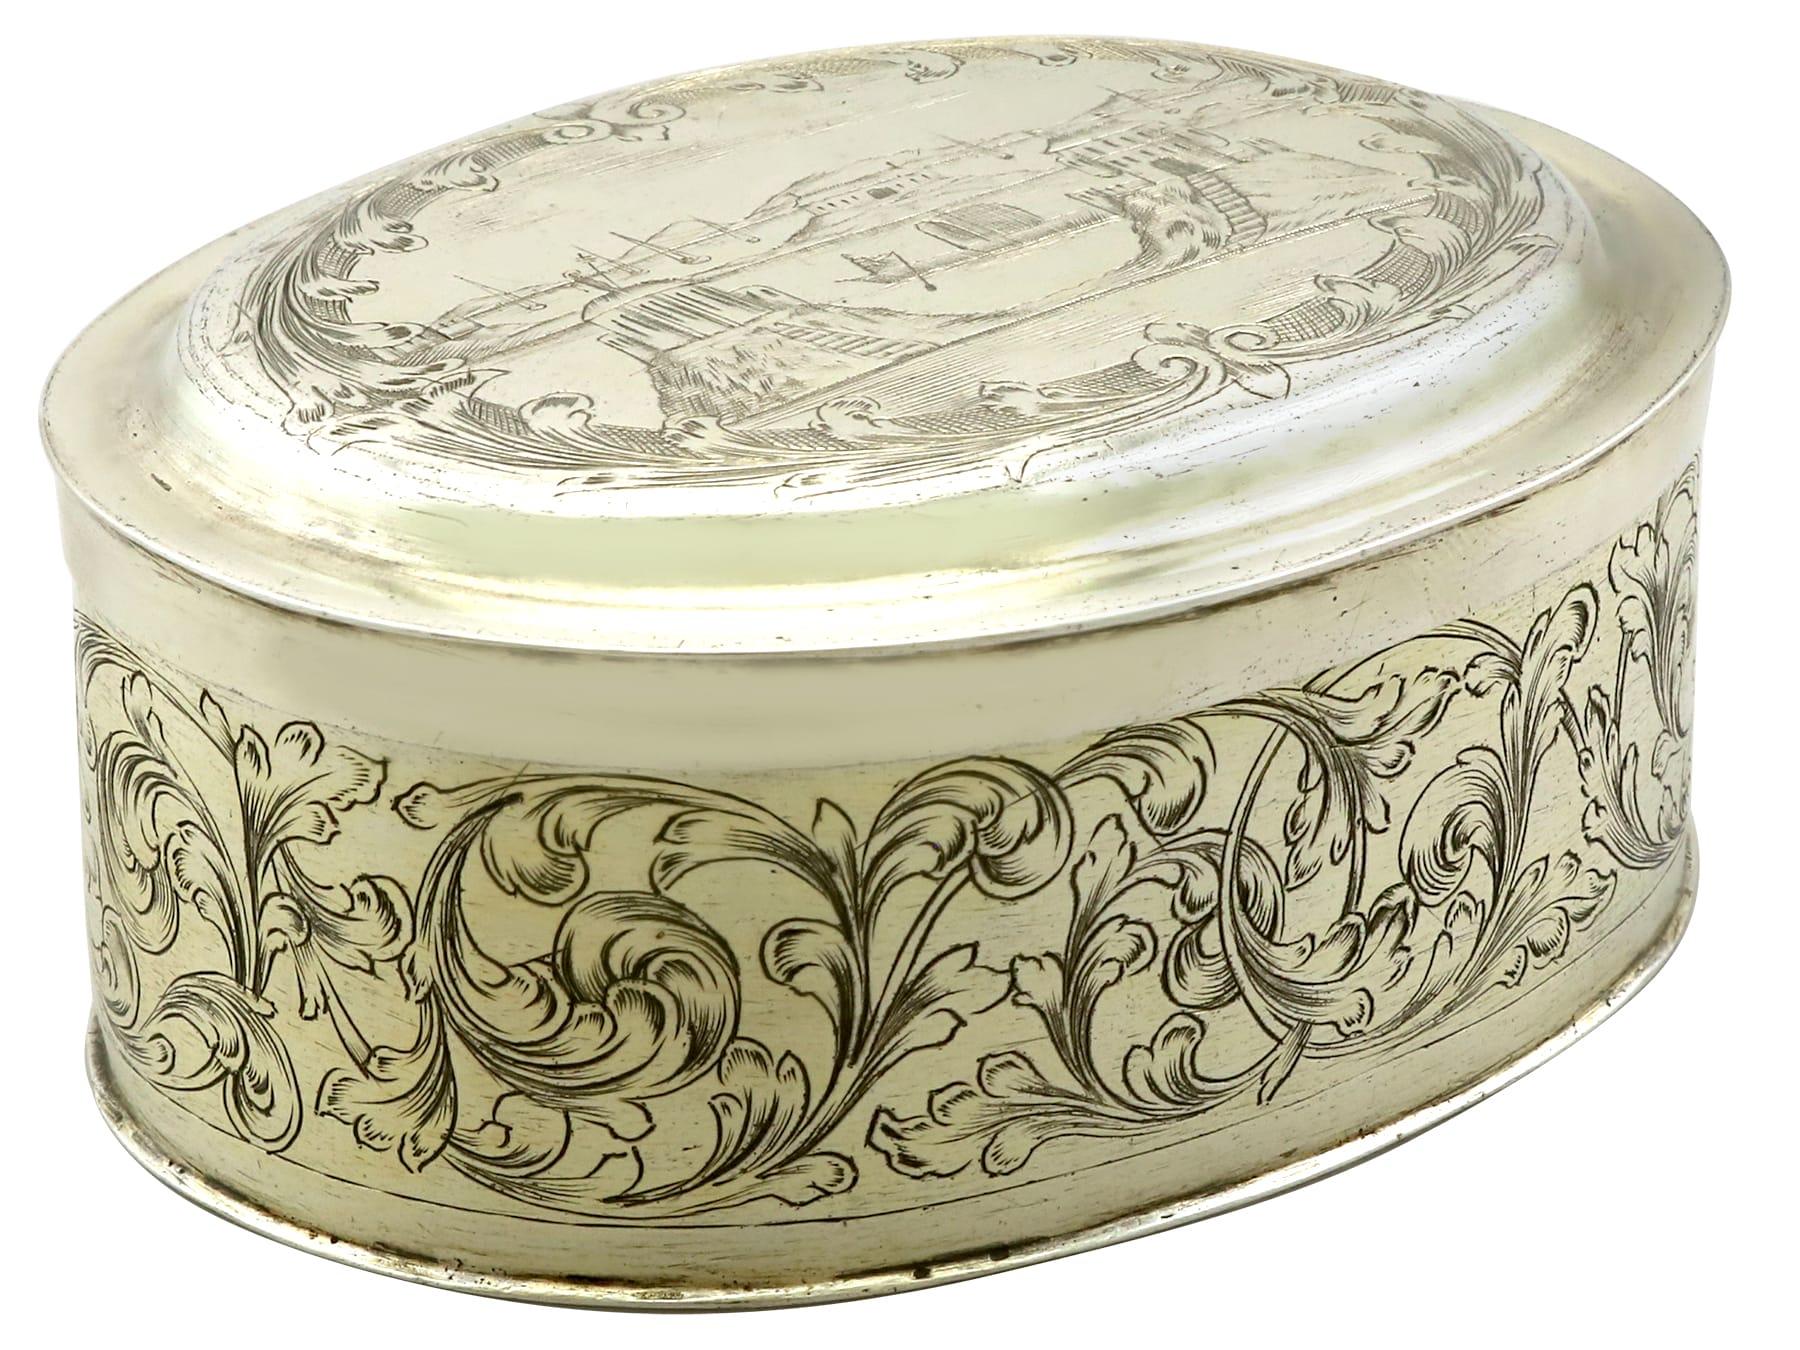 17th Century German Silver Gilt Tobacco Box In Excellent Condition For Sale In Jesmond, Newcastle Upon Tyne